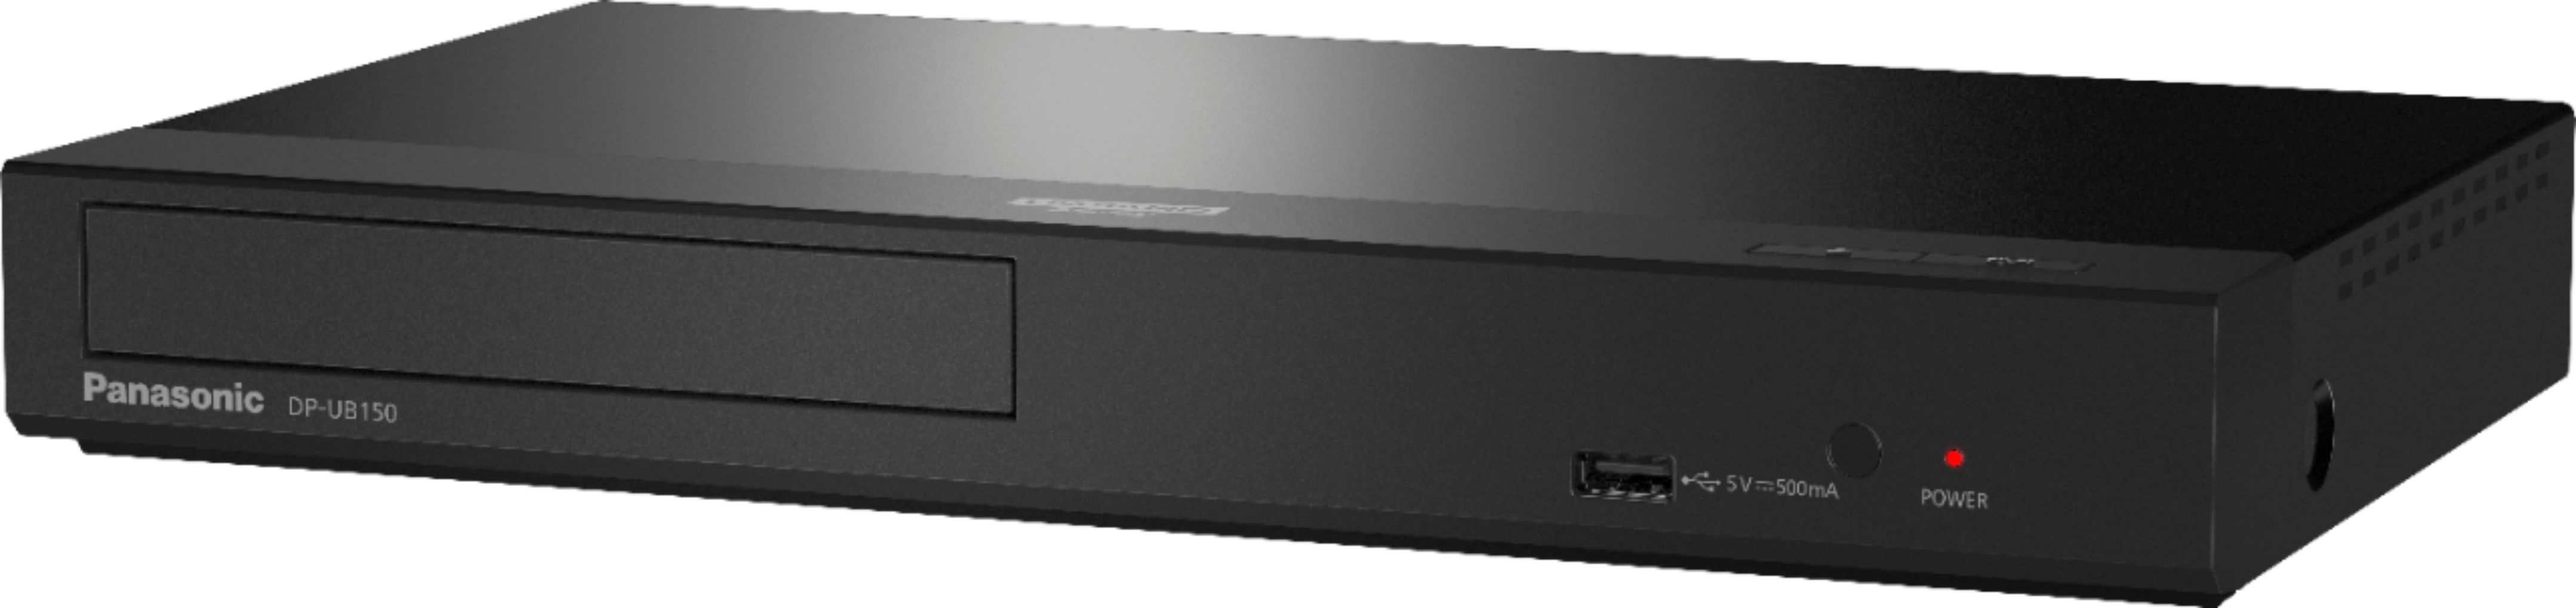 Left View: Sony - Streaming Blu-ray Disc player with Built-In Wi-Fi and HDMI cable - Black